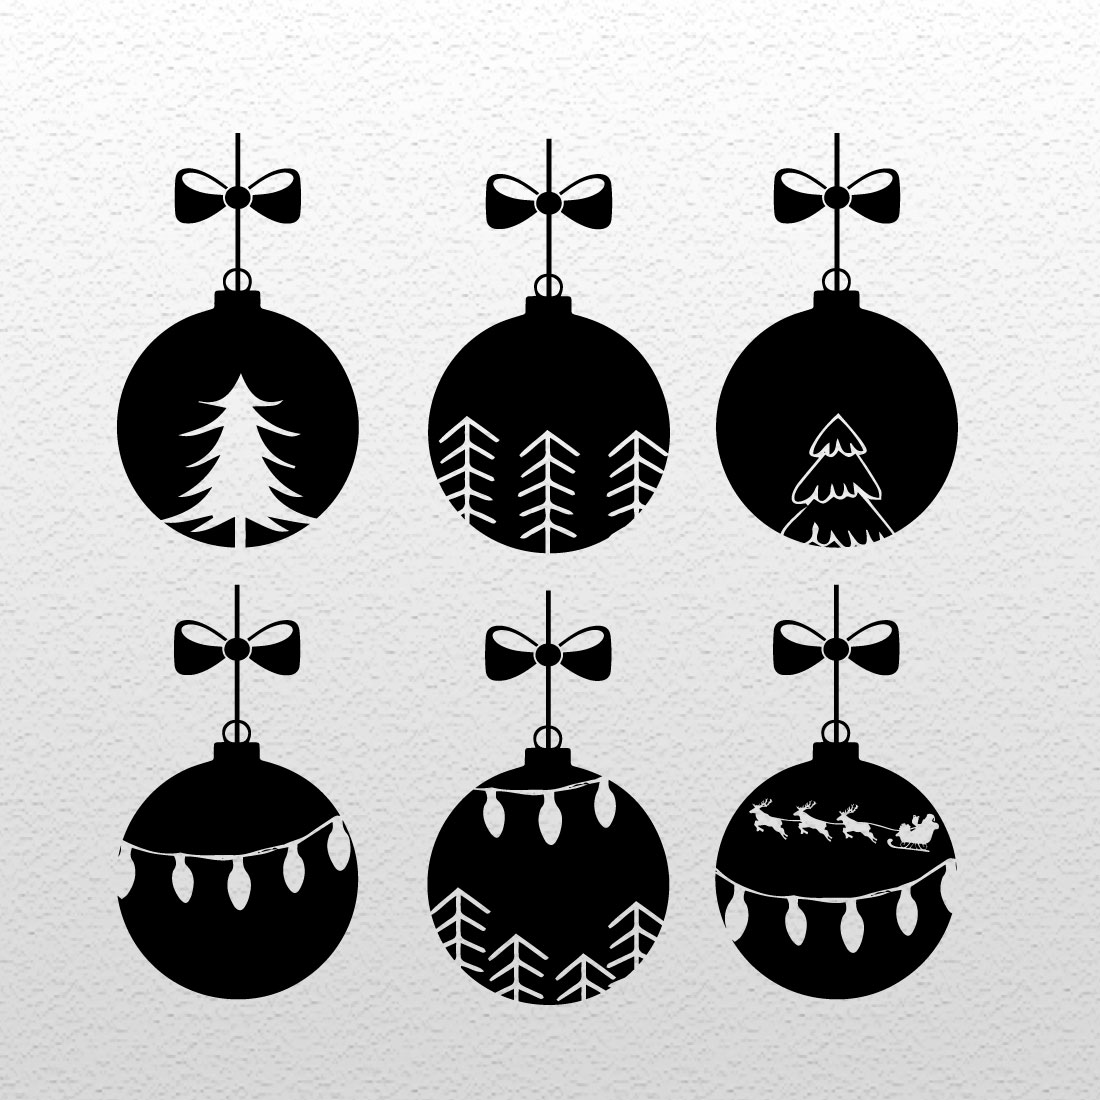 A pack of black adorable images of Christmas tree decorations in the form of a ball